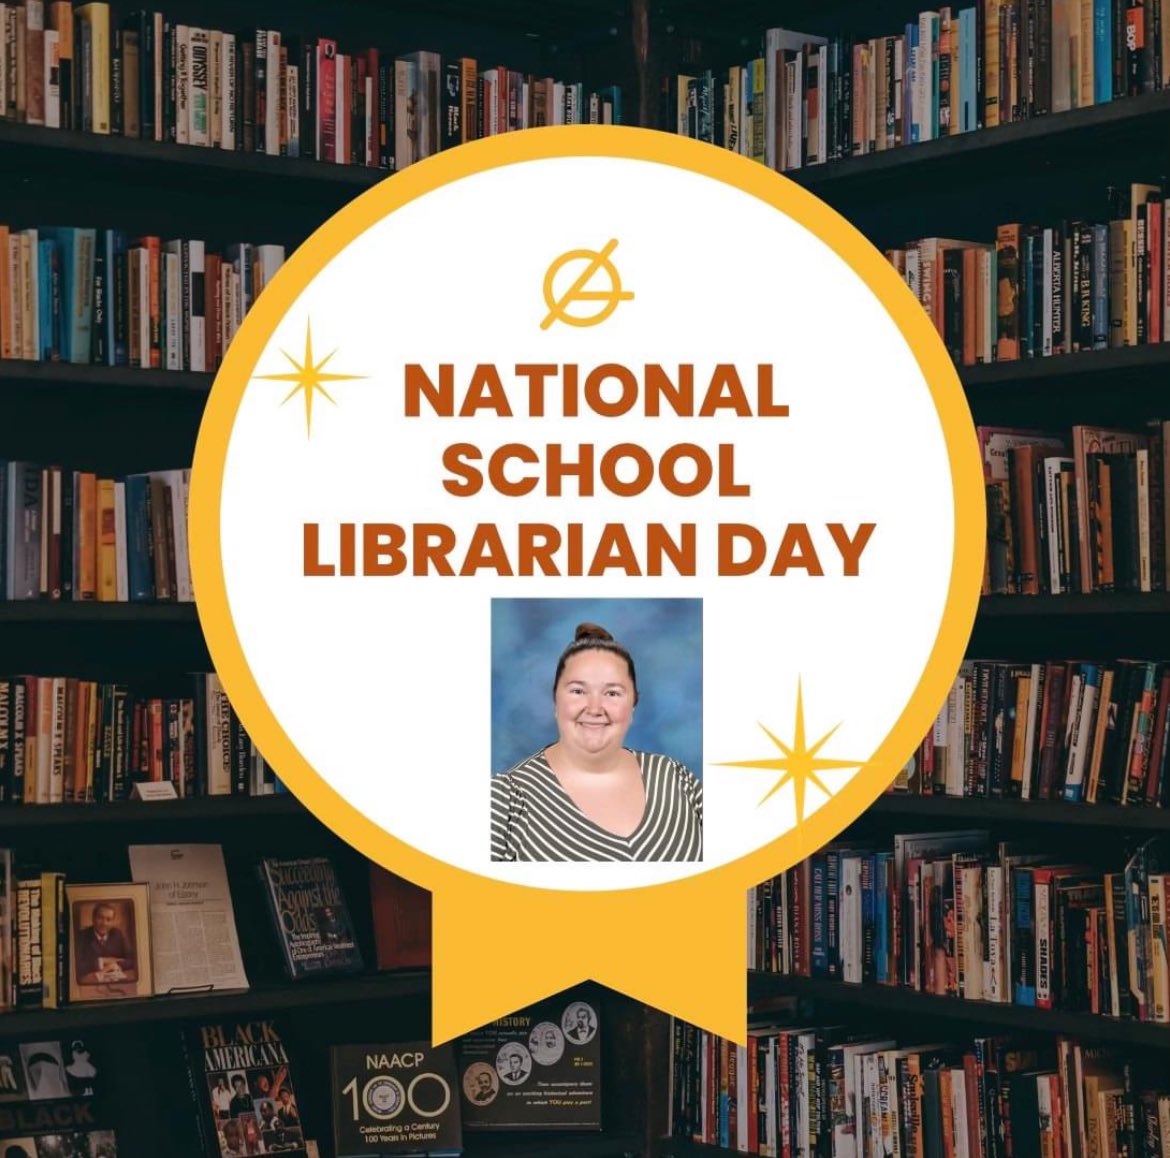 Today is #NationalSchoolLibrarianDay, we would like to say THANK YOU to Mrs. Stortz who keeps our students excited and engaged when it comes to reading and learning! Thank you for being #theworldsgreatest!